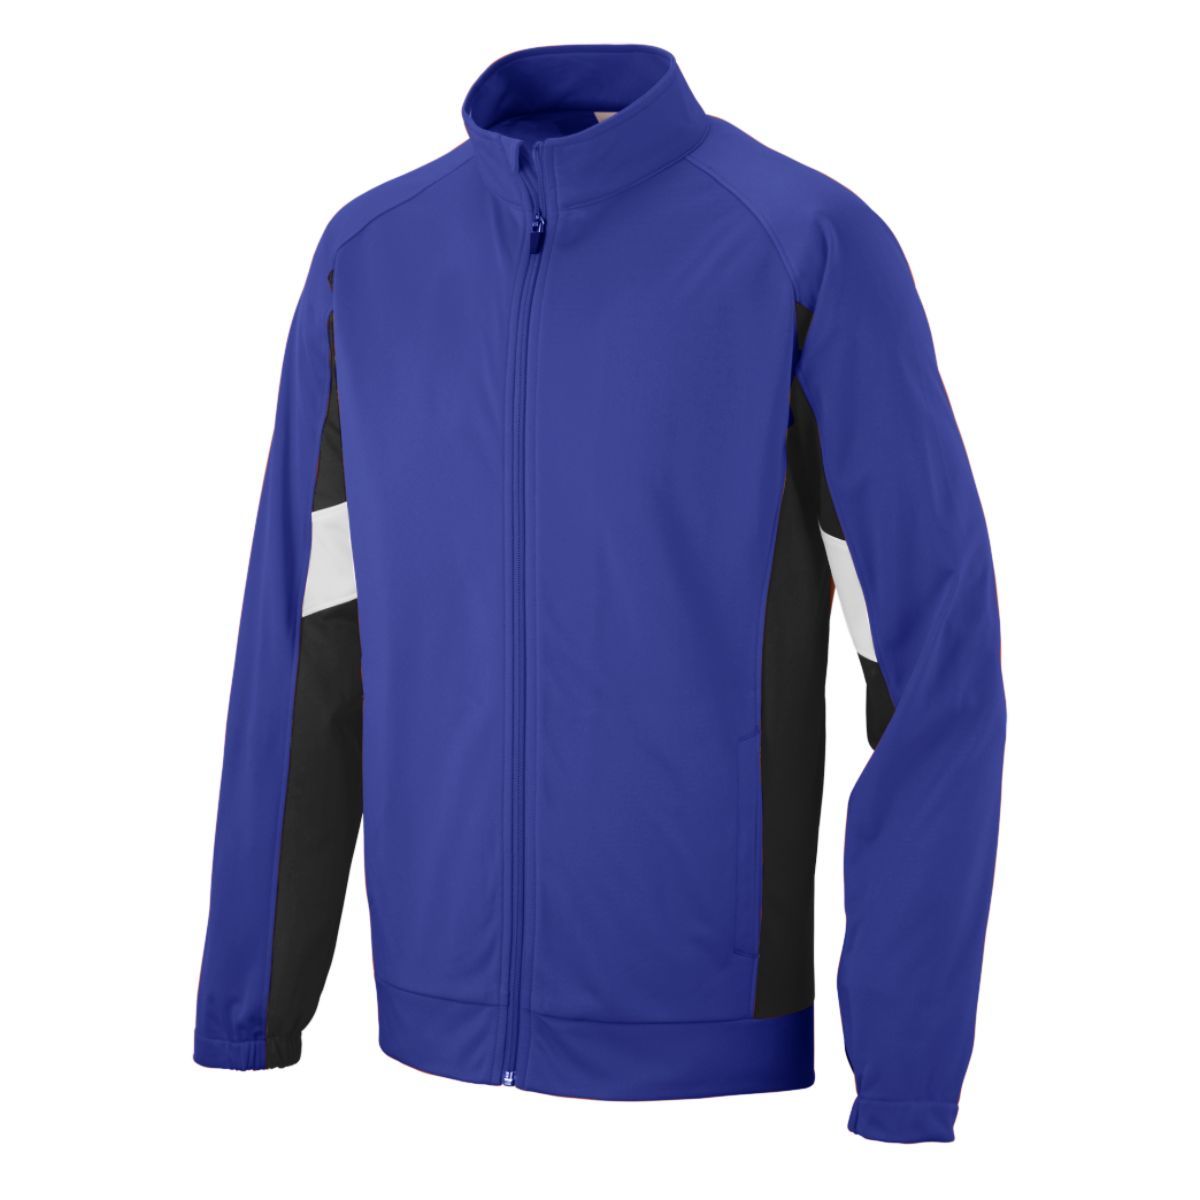 Augusta Sportswear Tour De Force Jacket in Purple/Black/White  -Part of the Adult, Adult-Jacket, Augusta-Products, Outerwear product lines at KanaleyCreations.com